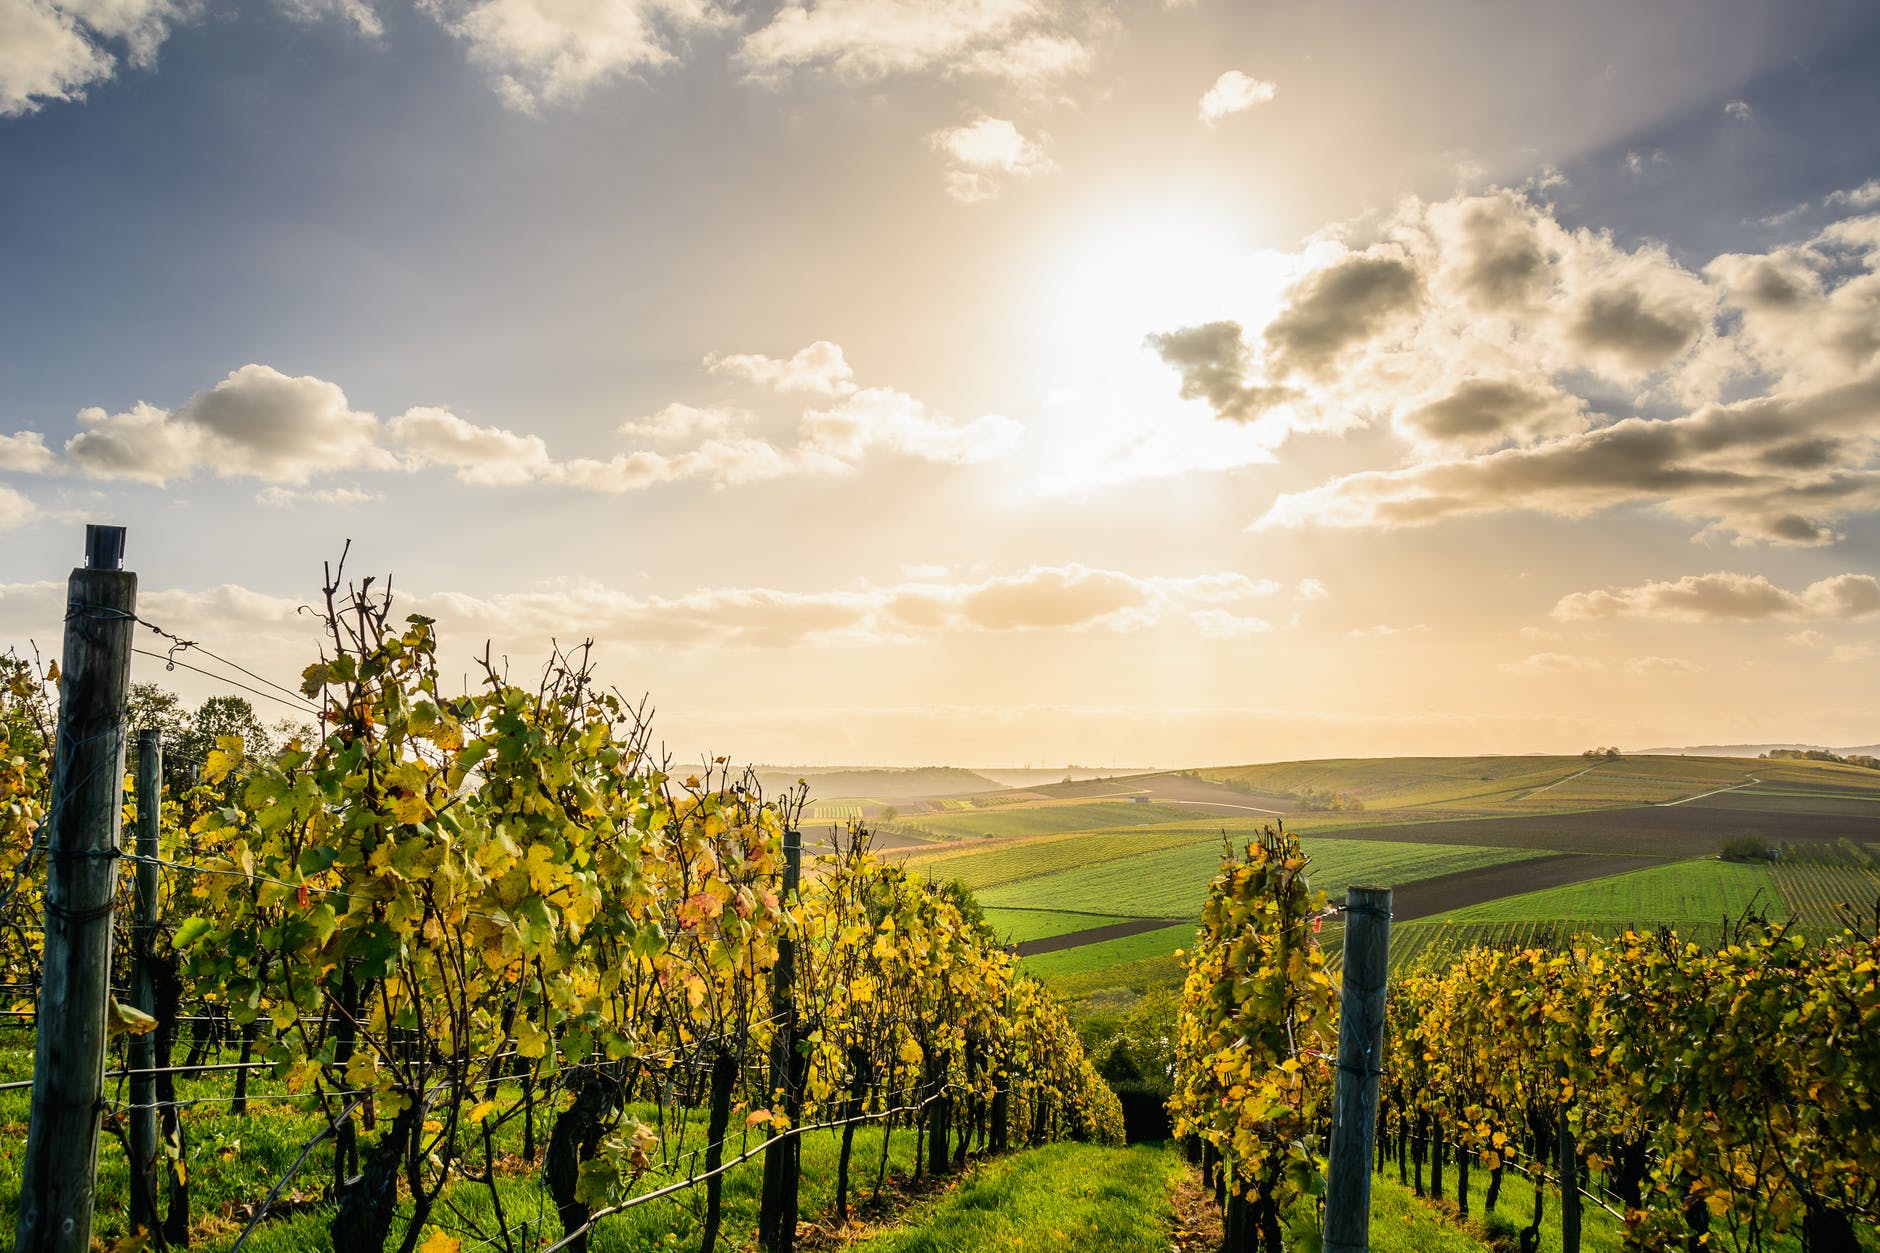 Hungarian Wine Guide: Small Is Very Beautiful In Somló Region